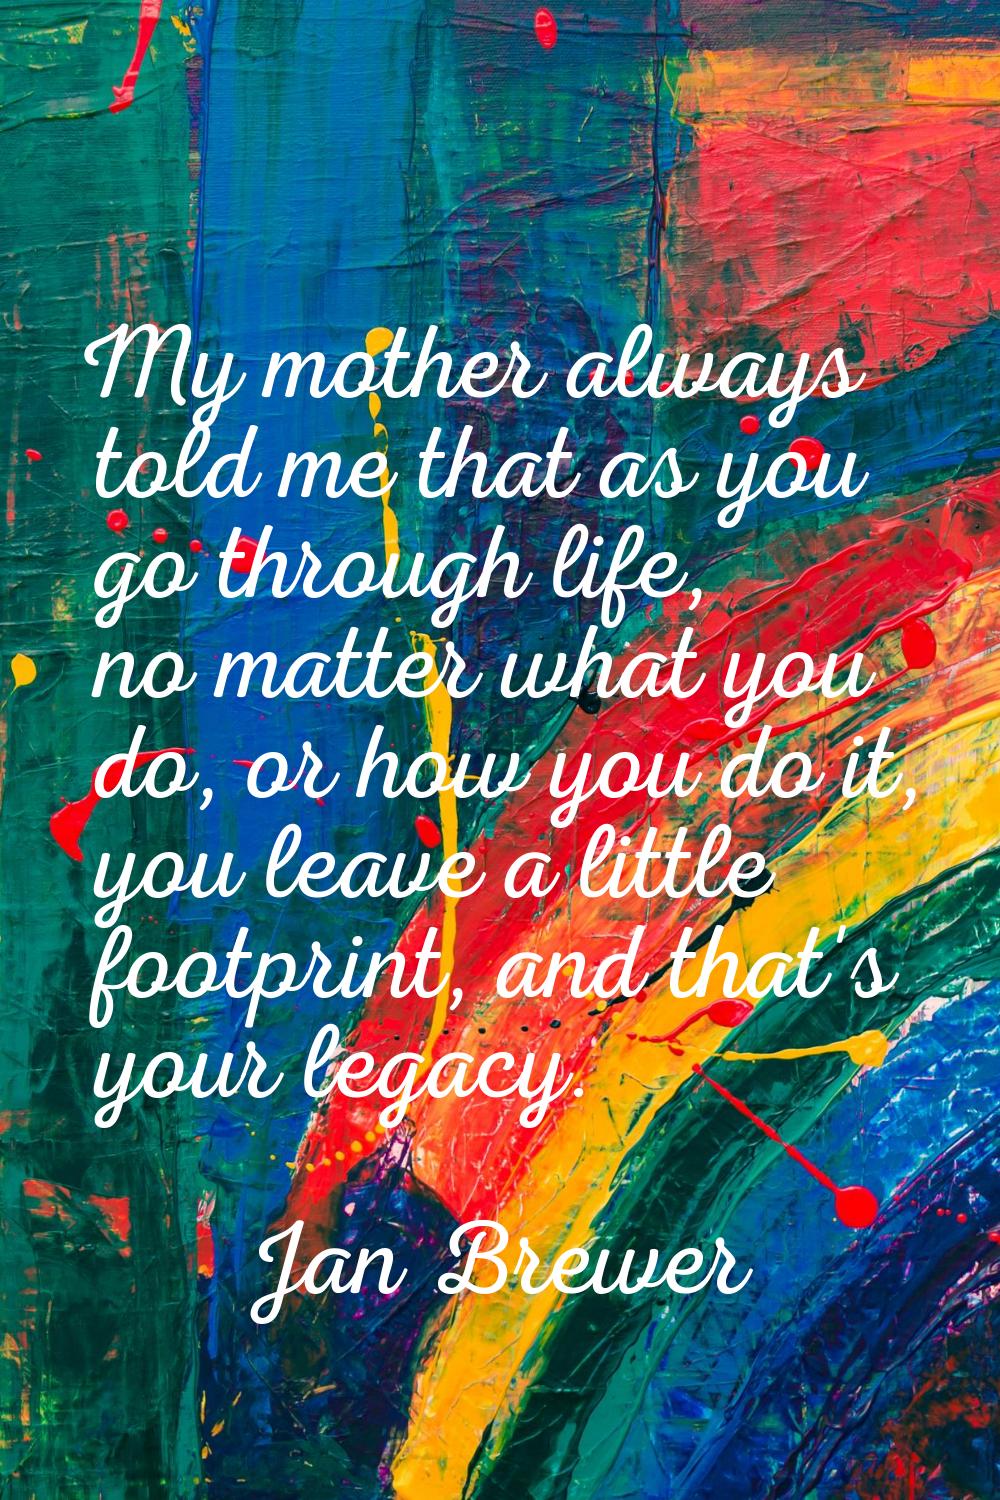 My mother always told me that as you go through life, no matter what you do, or how you do it, you 